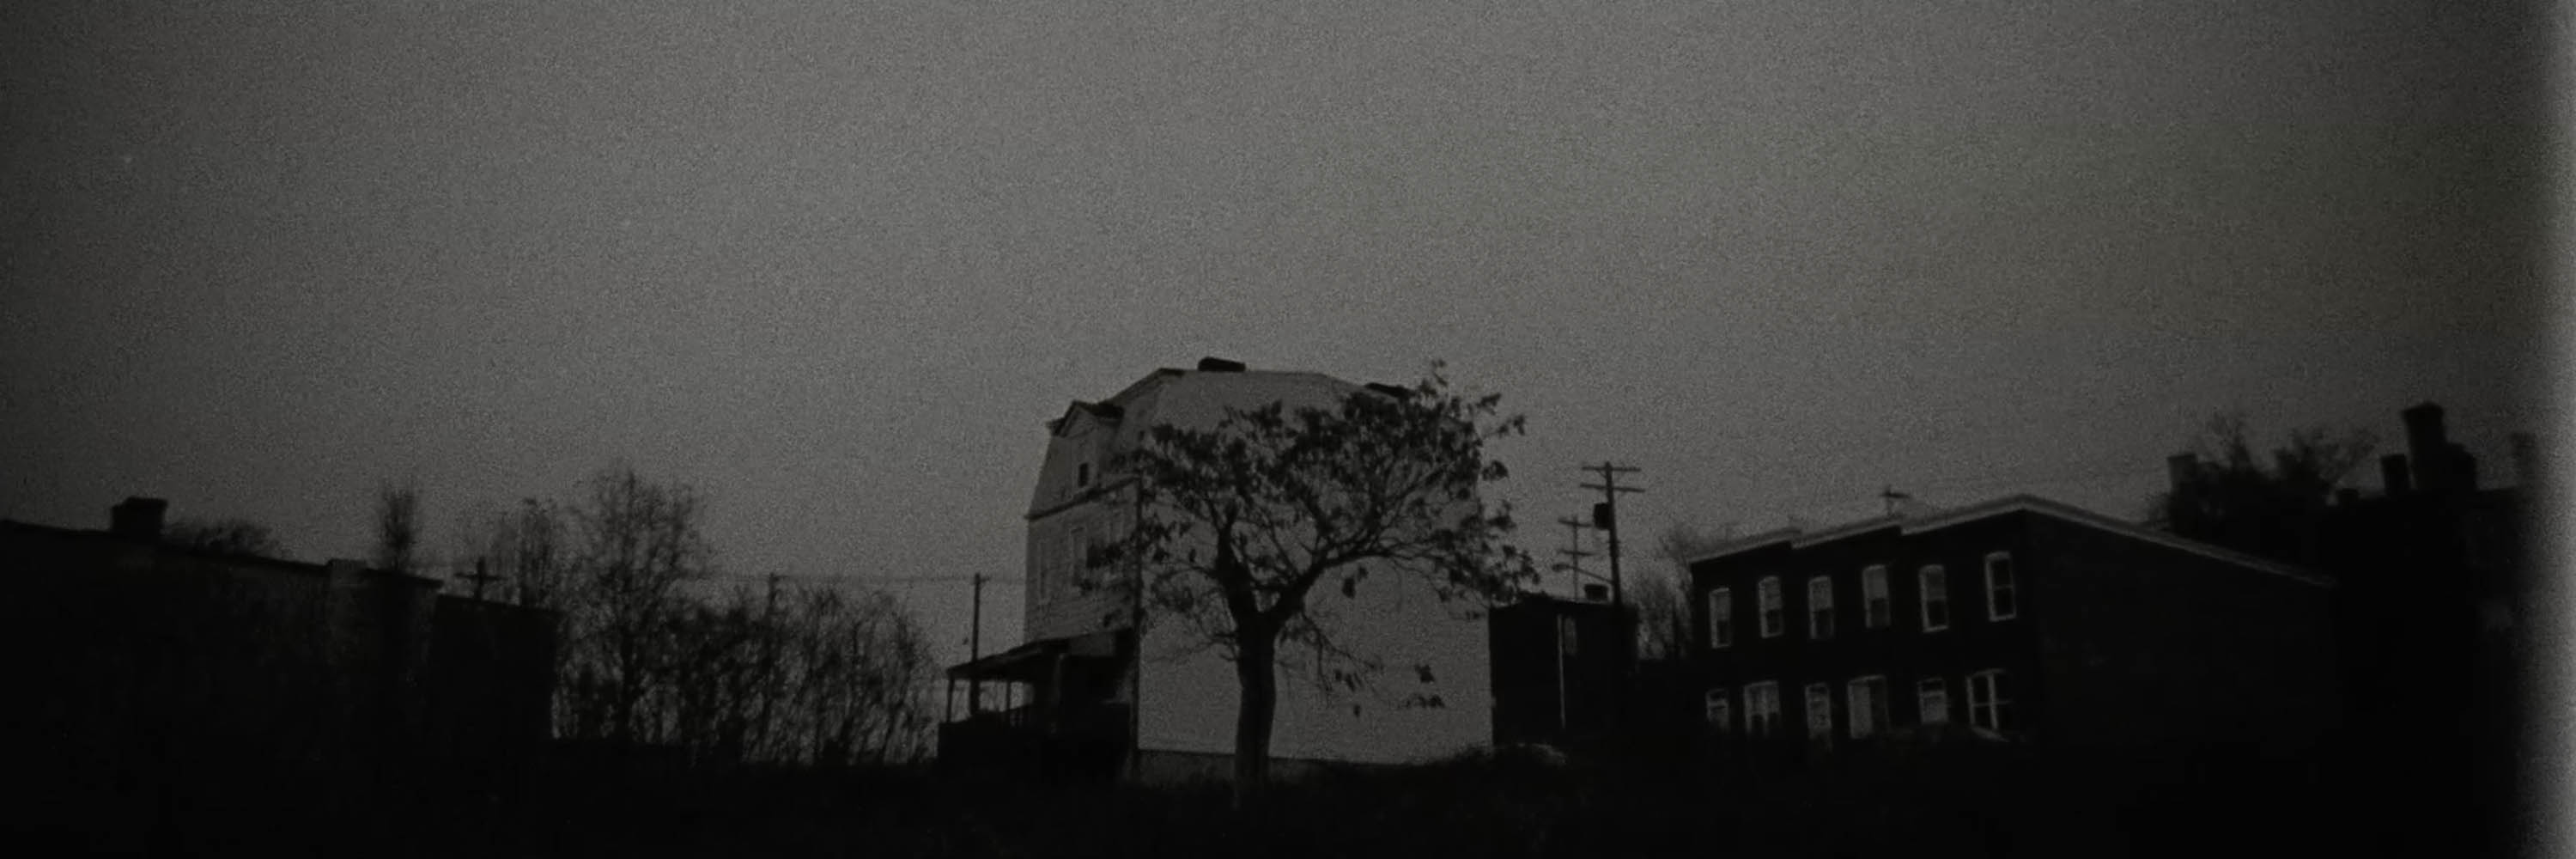 Landscape, with lone white house in the middle of the view, a leafless tree grows in front of the house